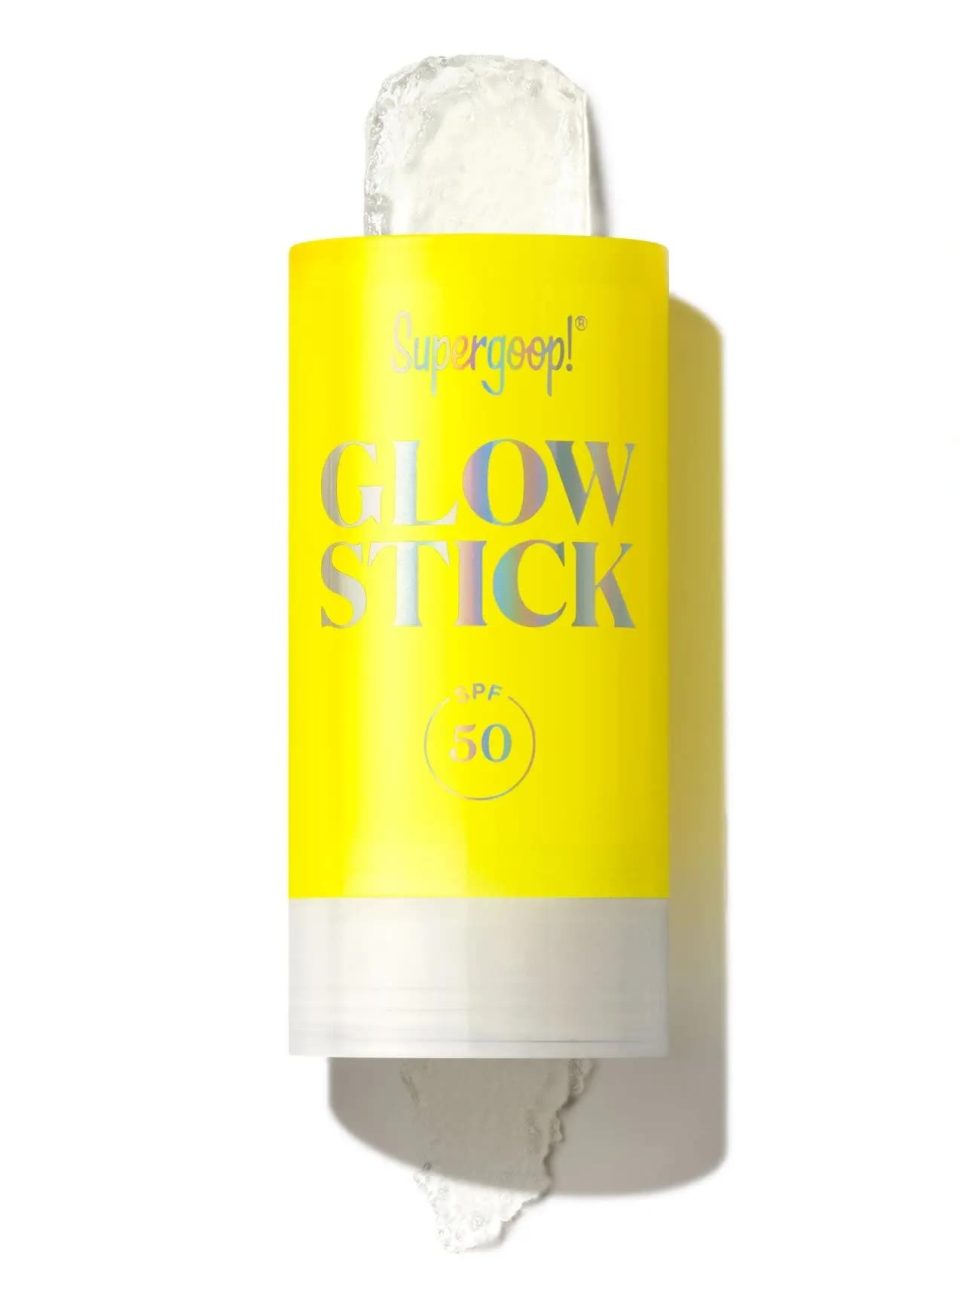 supergoop-glow-stick-spf-50-new-pack-and-texture